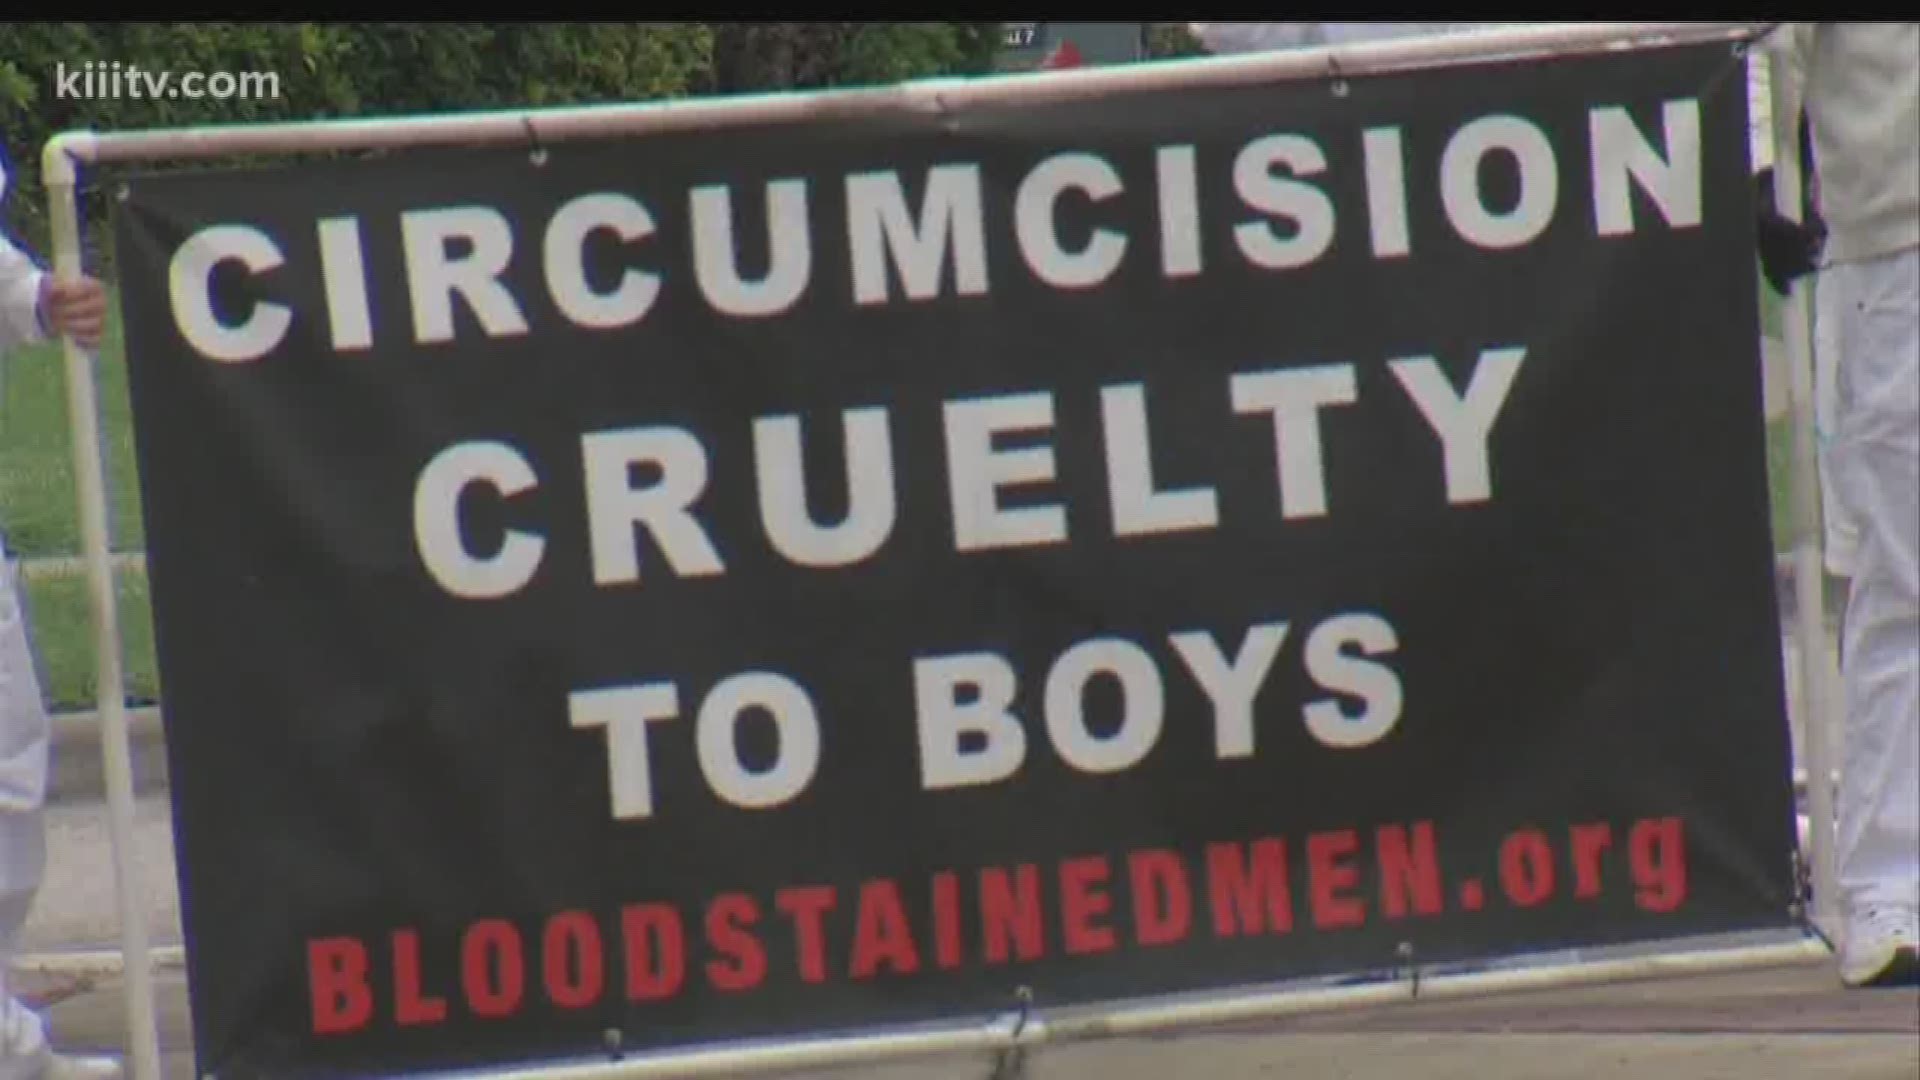 Group takes to street to protest circumcision